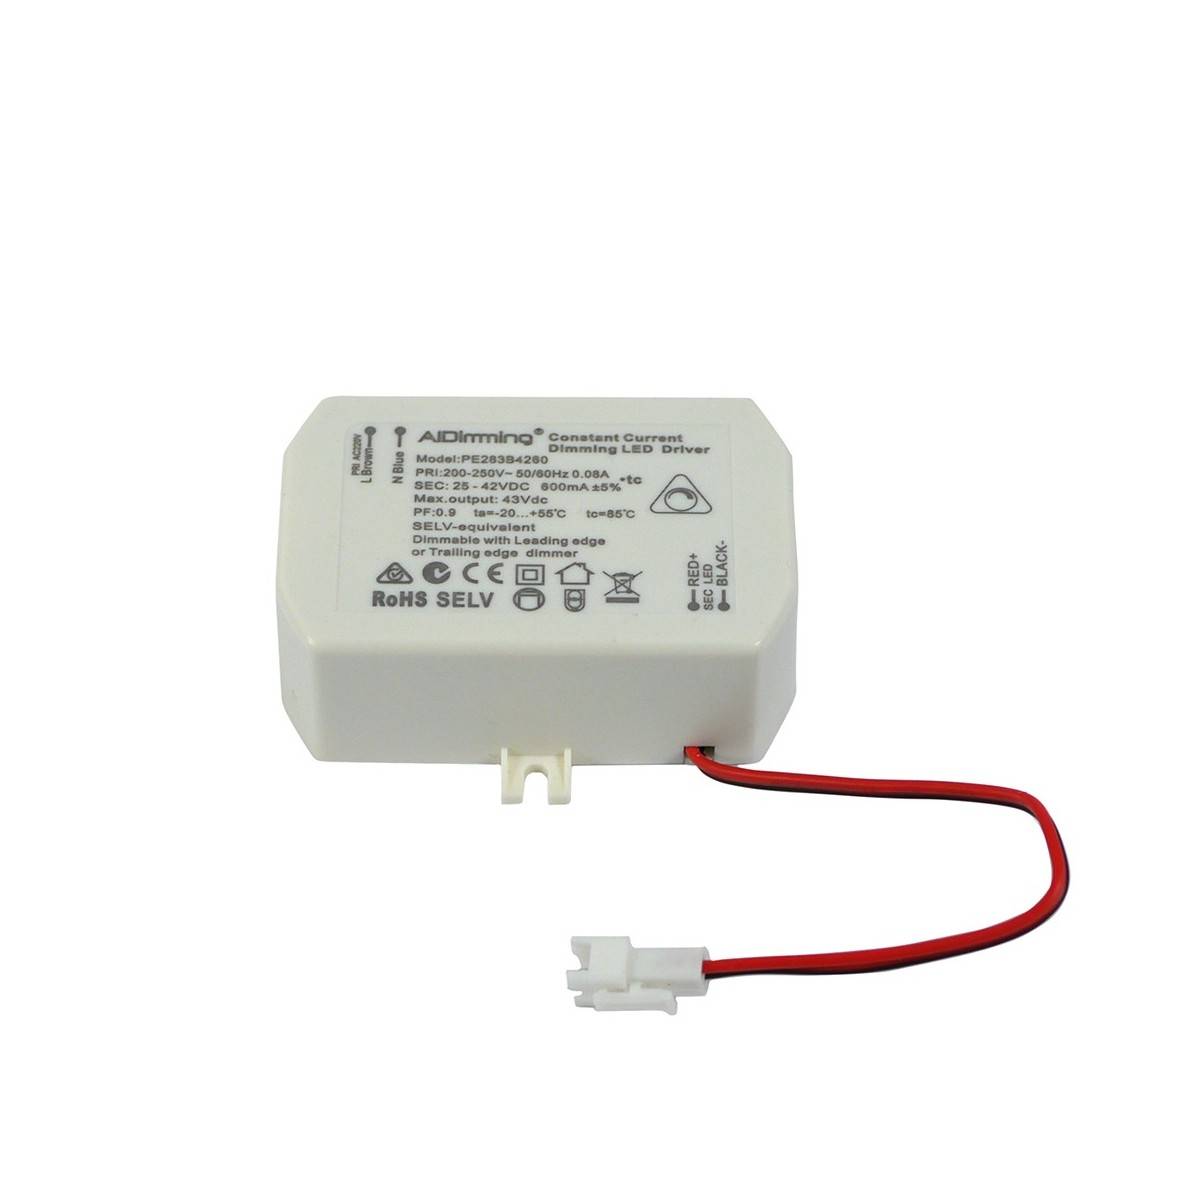 Dimmable LED constant current driver 25-42VDC 600mA